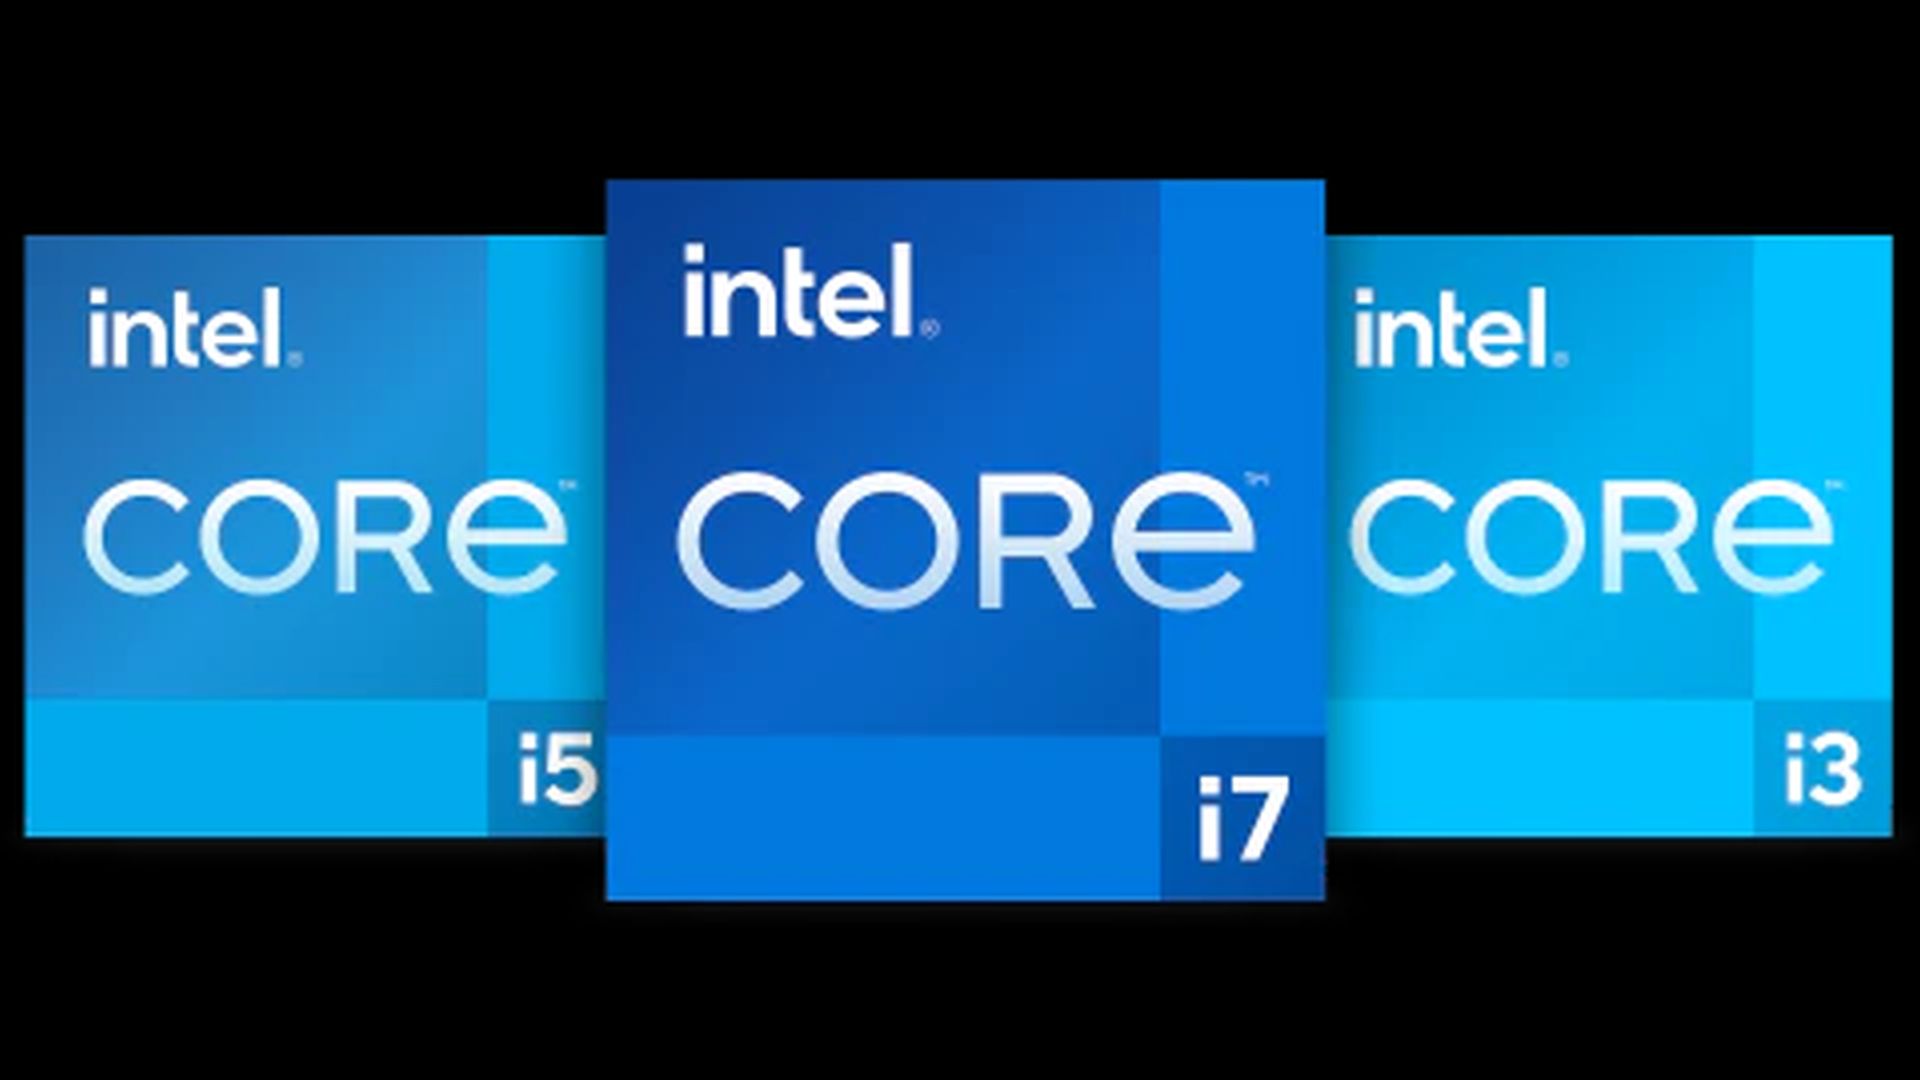 Intel Core i5-13500 and Core i5-13400 punch above their weight